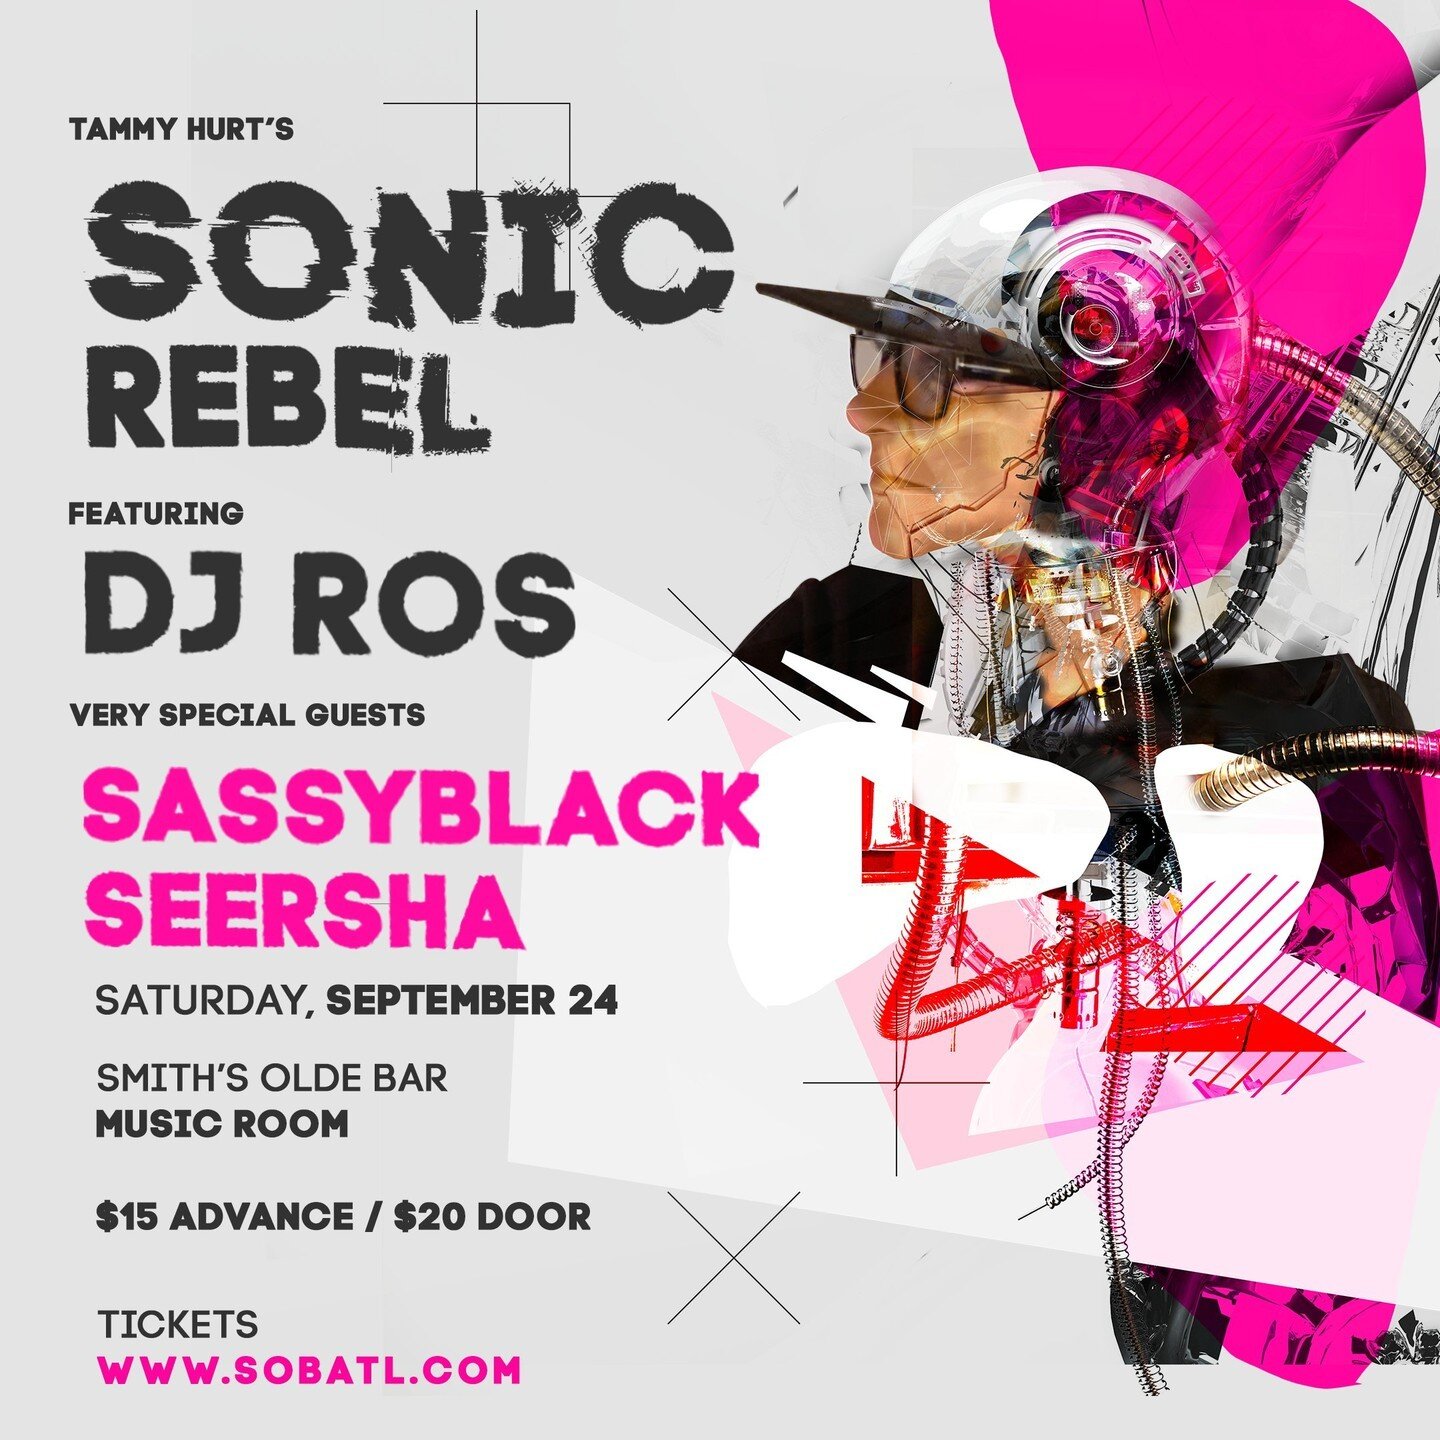 We're thrilled to announce that @sassyblackcat and @seershamusic have been added to our show at Smith's Olde Bar on September 24!! Tickets are moving fast!